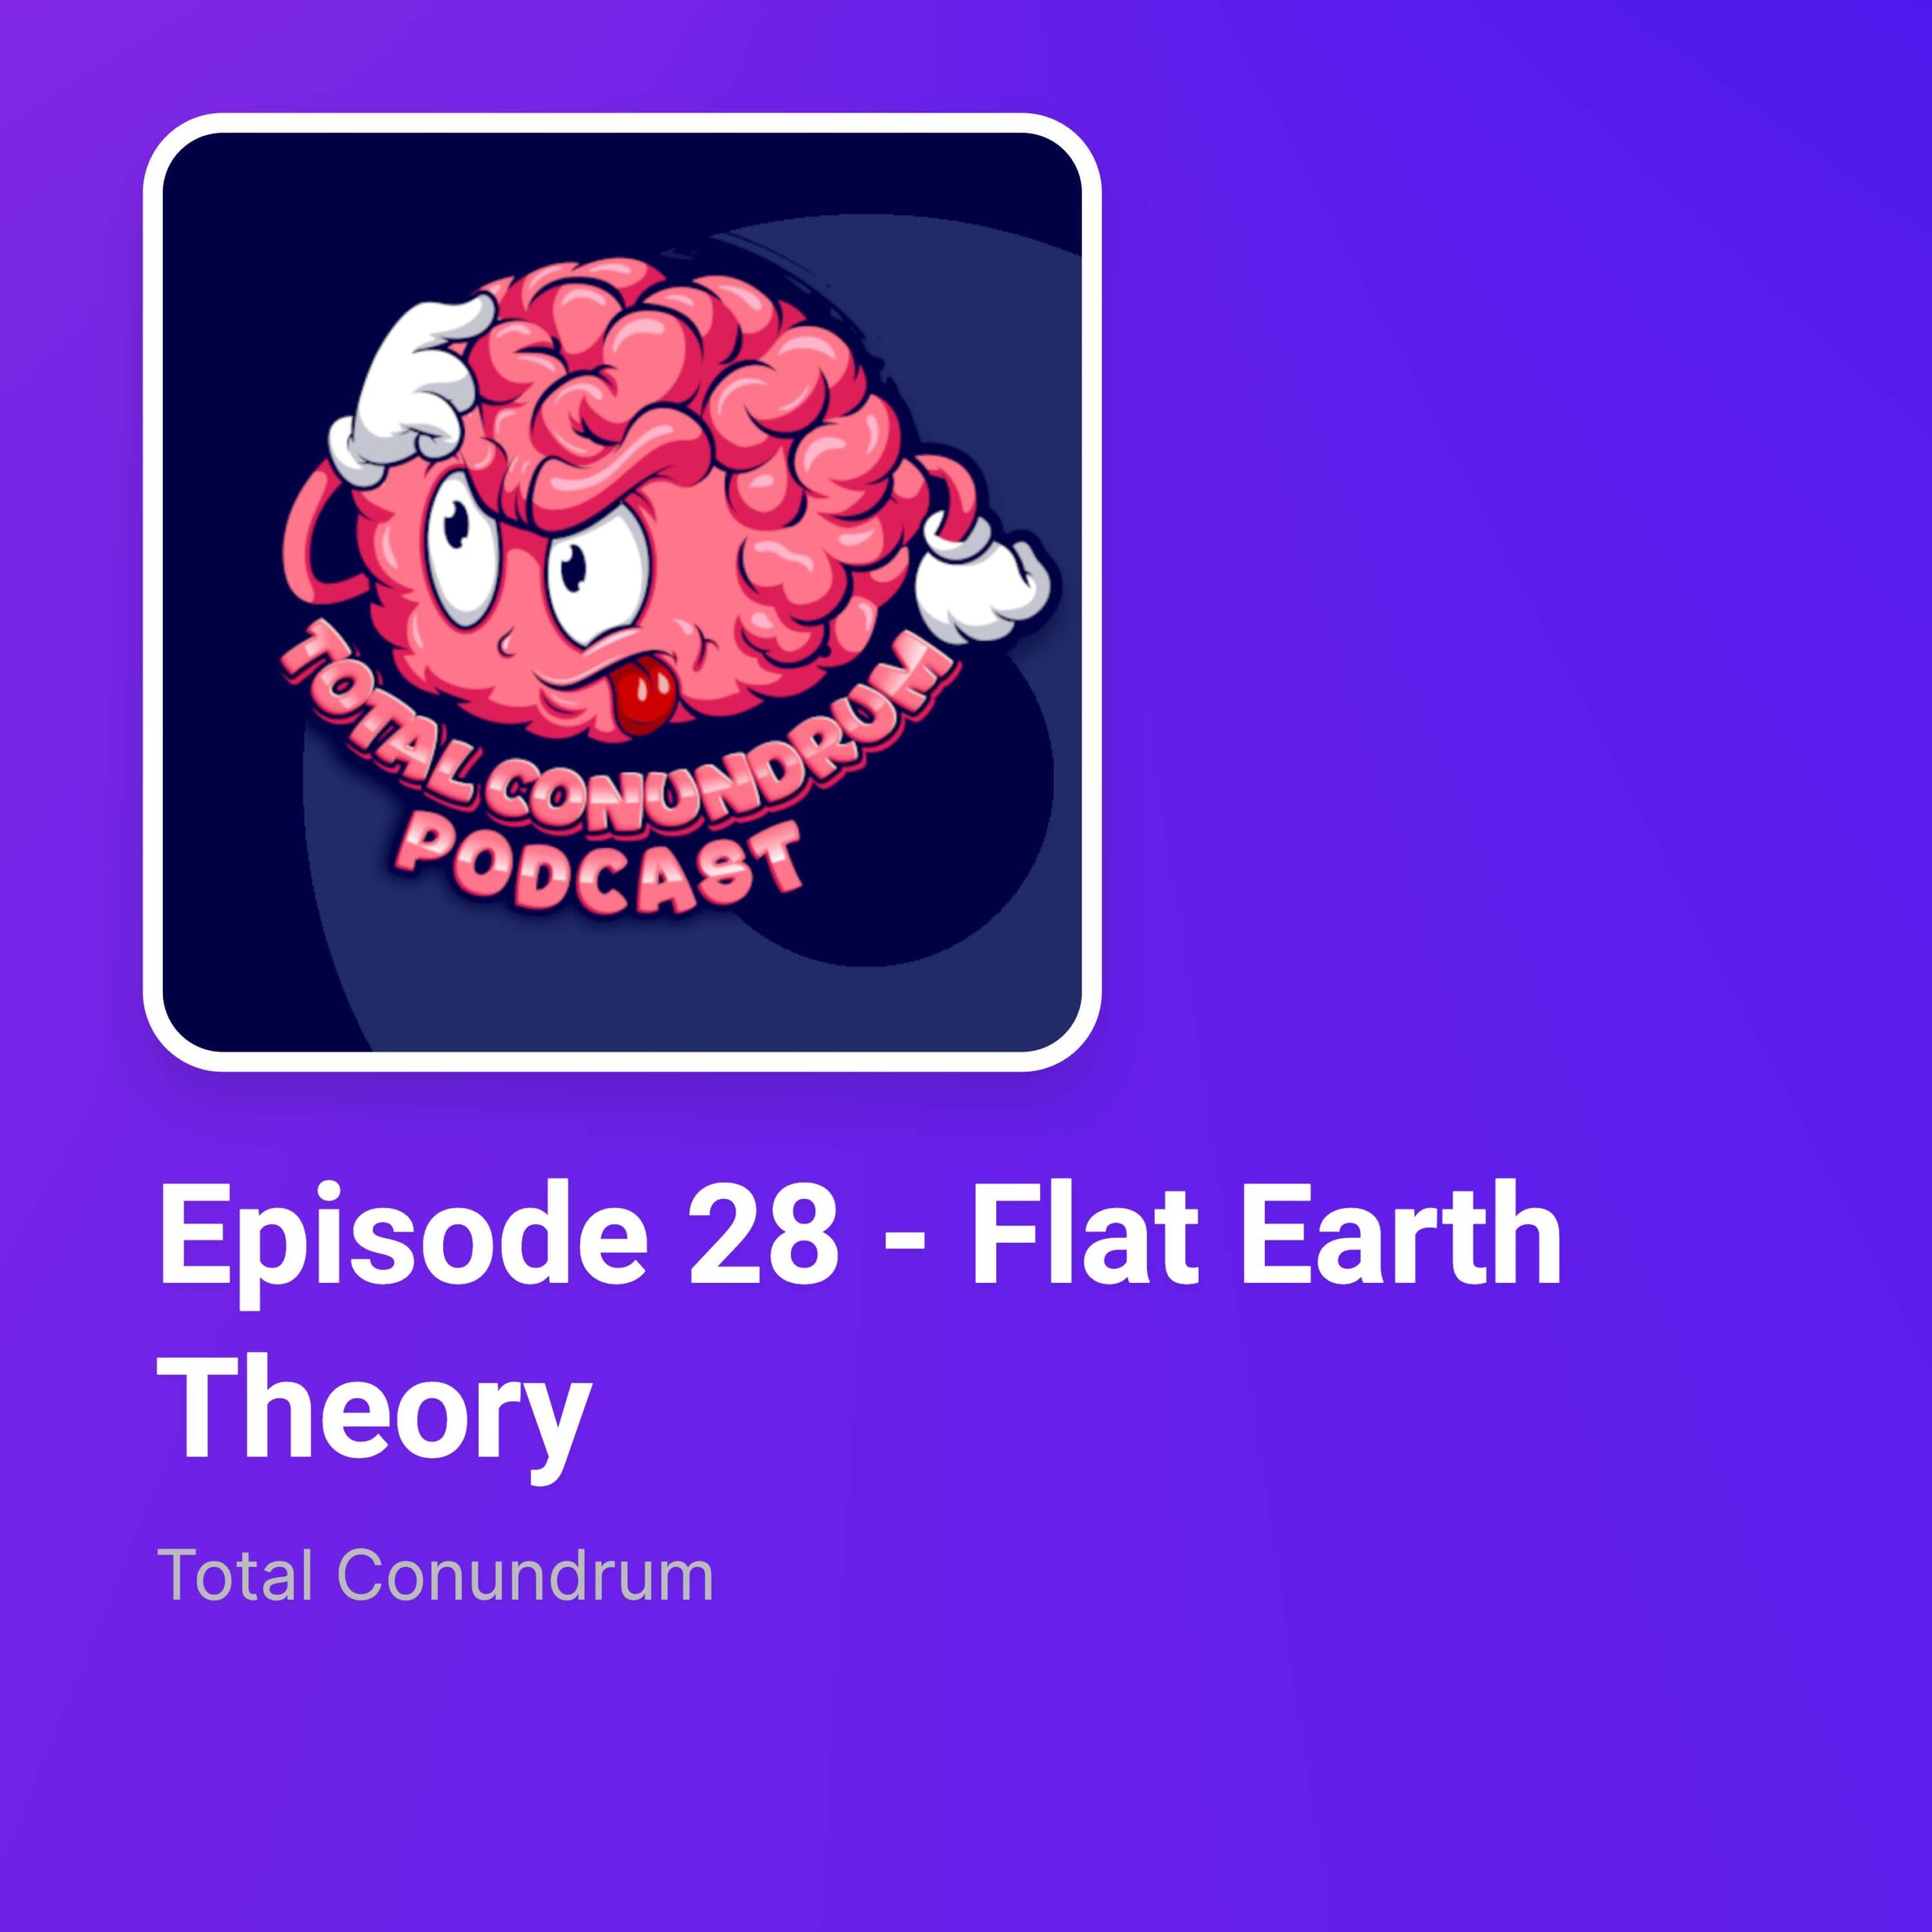 Episode 28 - Flat Earth Theory